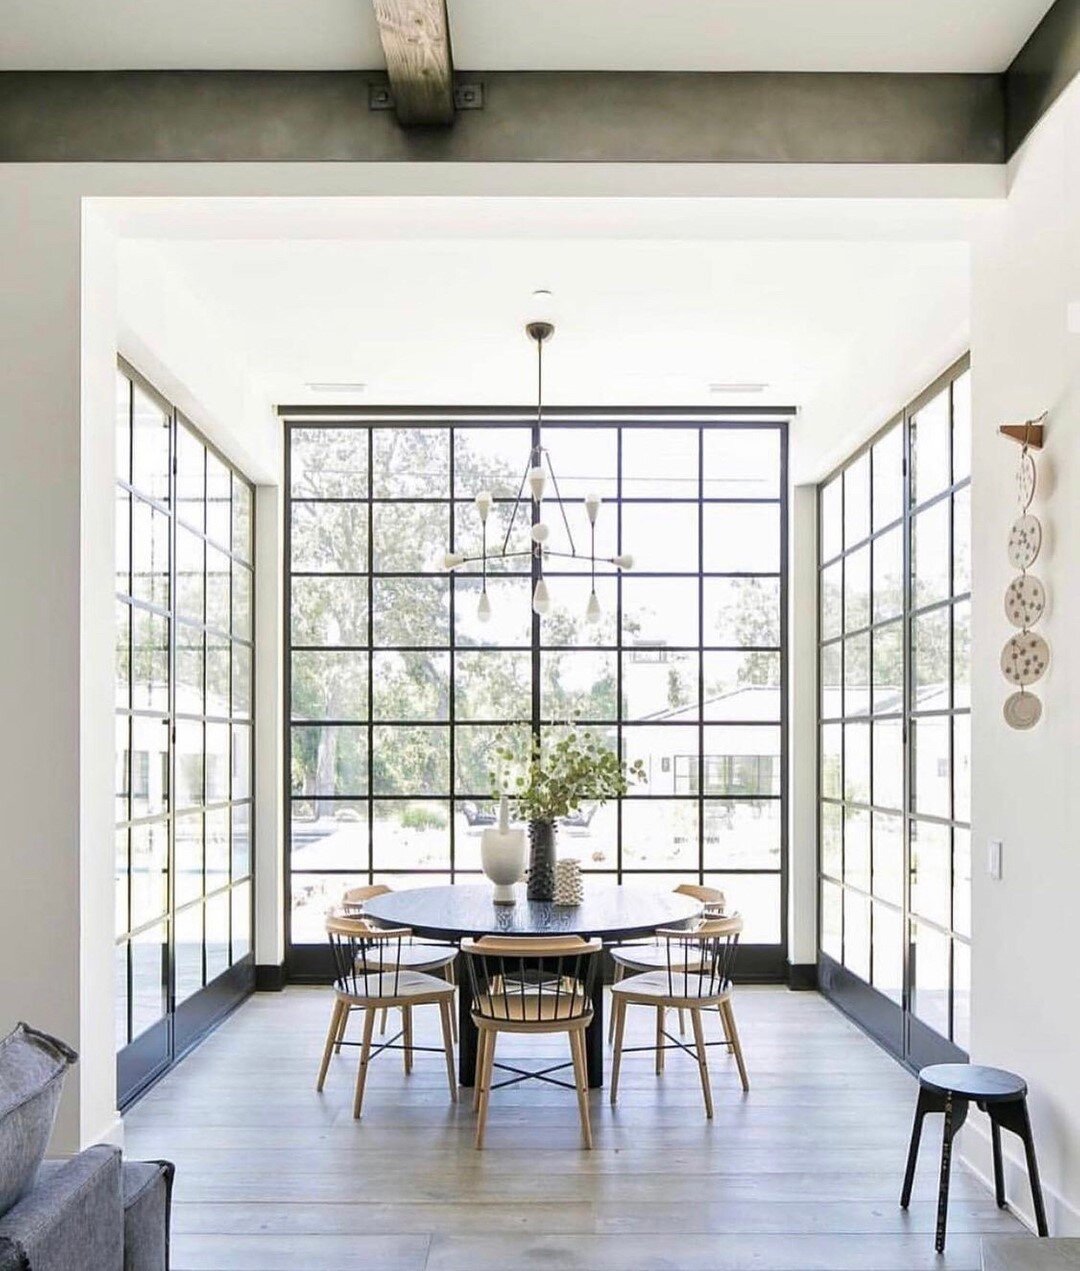 The perfect breakfast room does exist☕️⠀⠀⠀⠀⠀⠀⠀⠀⠀
⠀⠀⠀⠀⠀⠀⠀⠀⠀
What is your favorite way to design for everyday? A chic sofa? An eclectic gallery wall? A modern wall of windows? Let us know in the comments below! 👇⠀⠀⠀⠀⠀⠀⠀⠀⠀
⠀⠀⠀⠀⠀⠀⠀⠀⠀
⠀⠀⠀⠀⠀⠀⠀⠀⠀
Beautiful